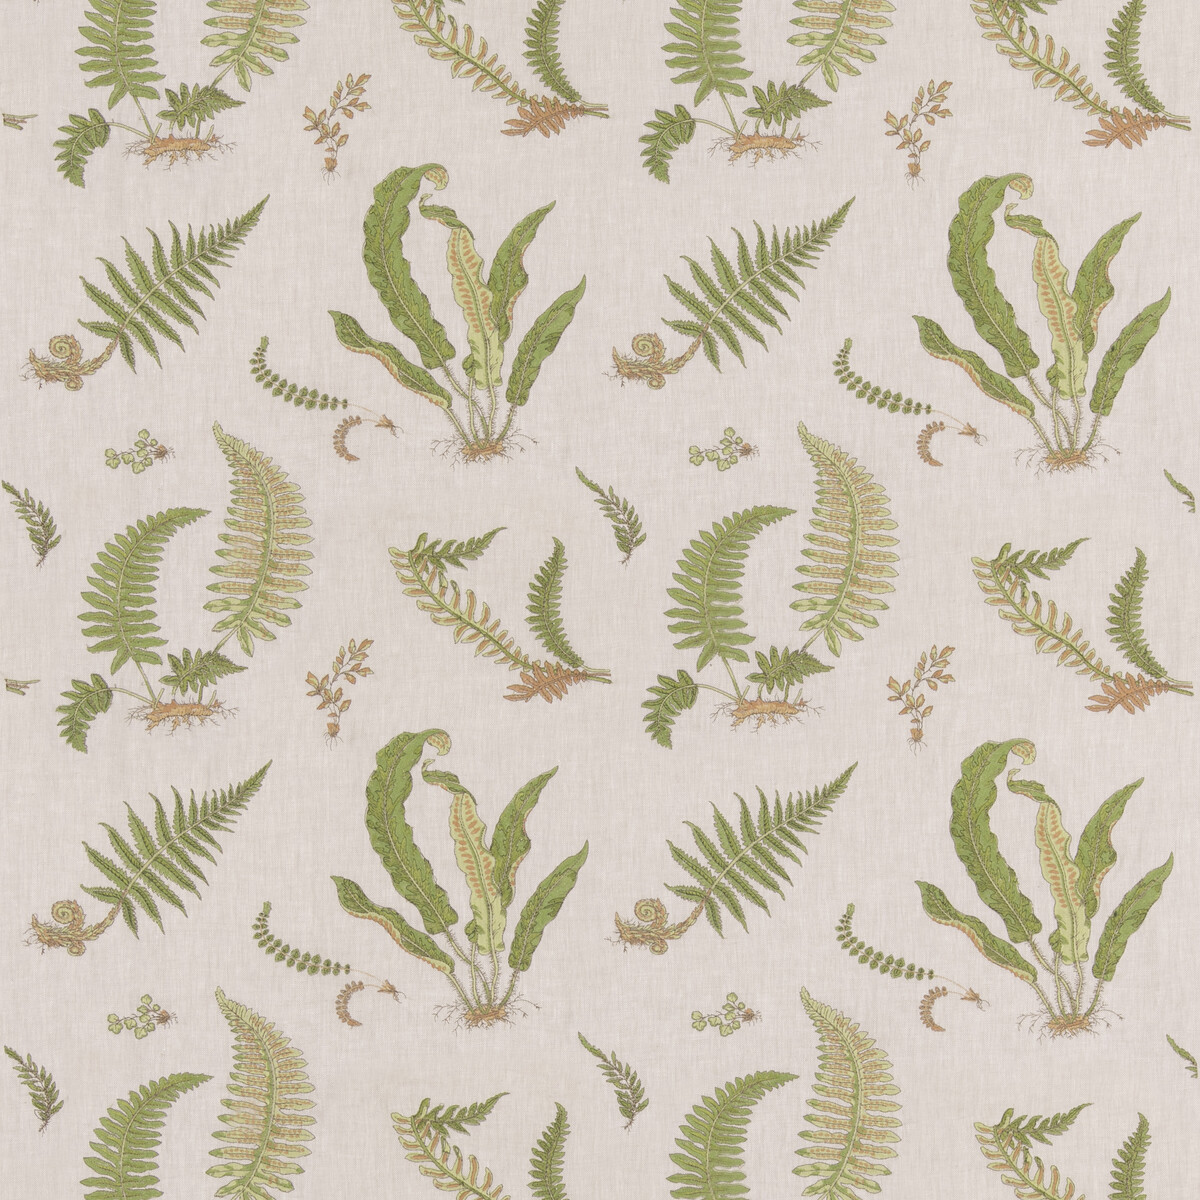 Ferns Embroidery